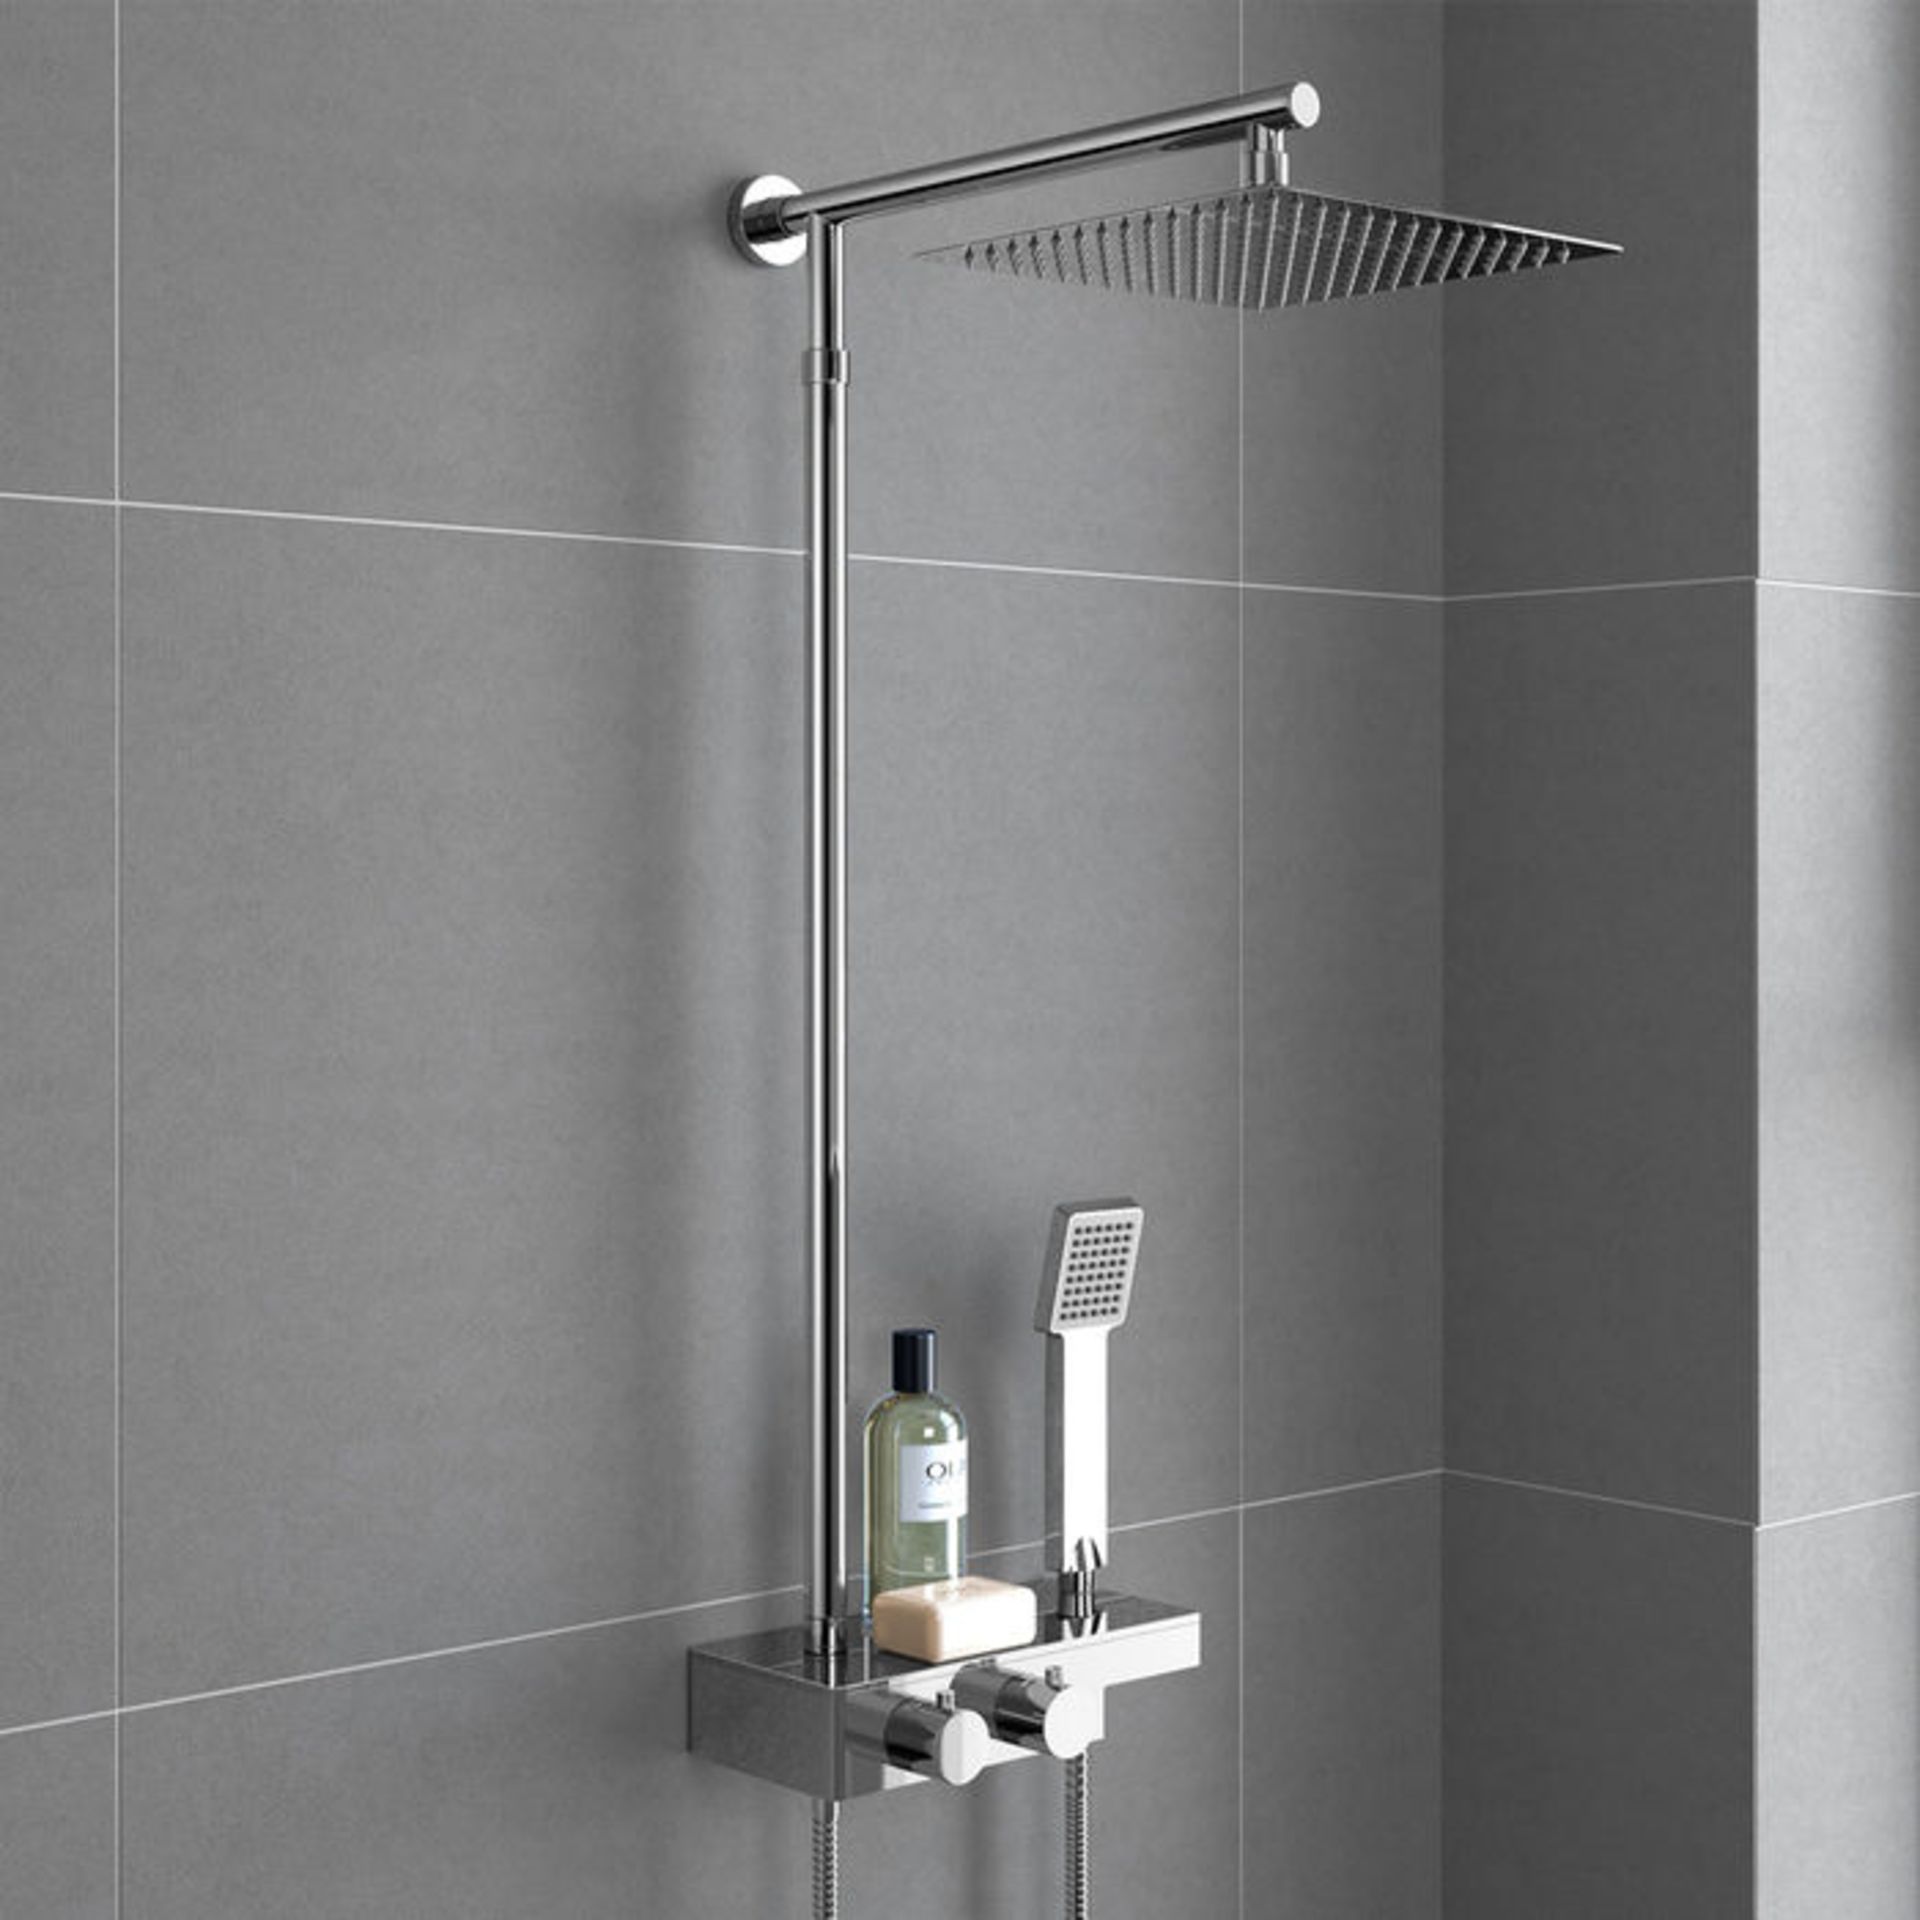 (H213) Square Exposed Thermostatic Shower Shelf, Kit & Large Head. RRP £349.99. Style meets function - Image 2 of 6